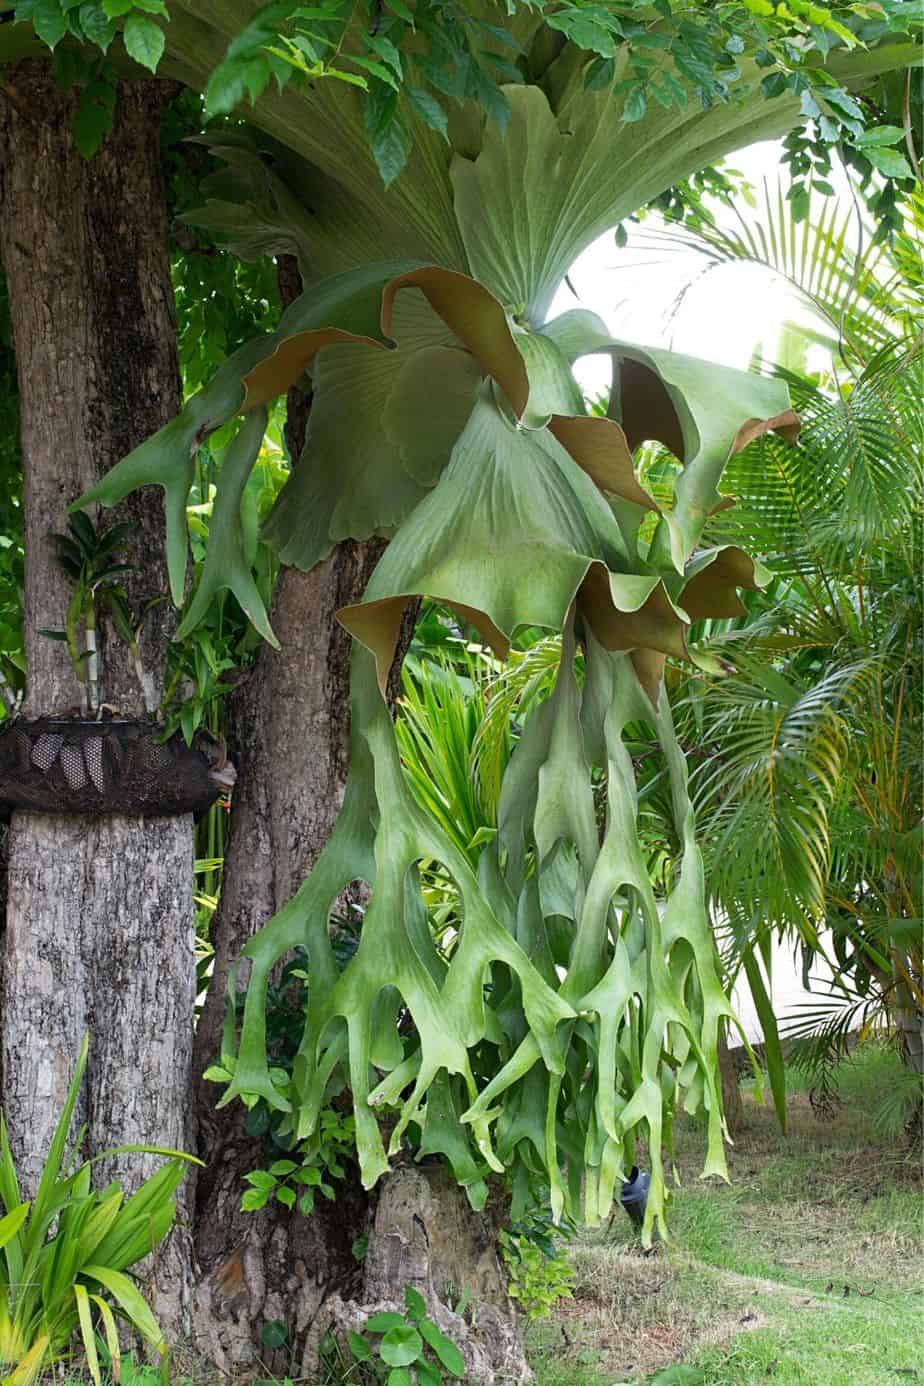 Though the Staghorn Fern grows on other plants, make sure that its roots are submerged in water for it to thrive